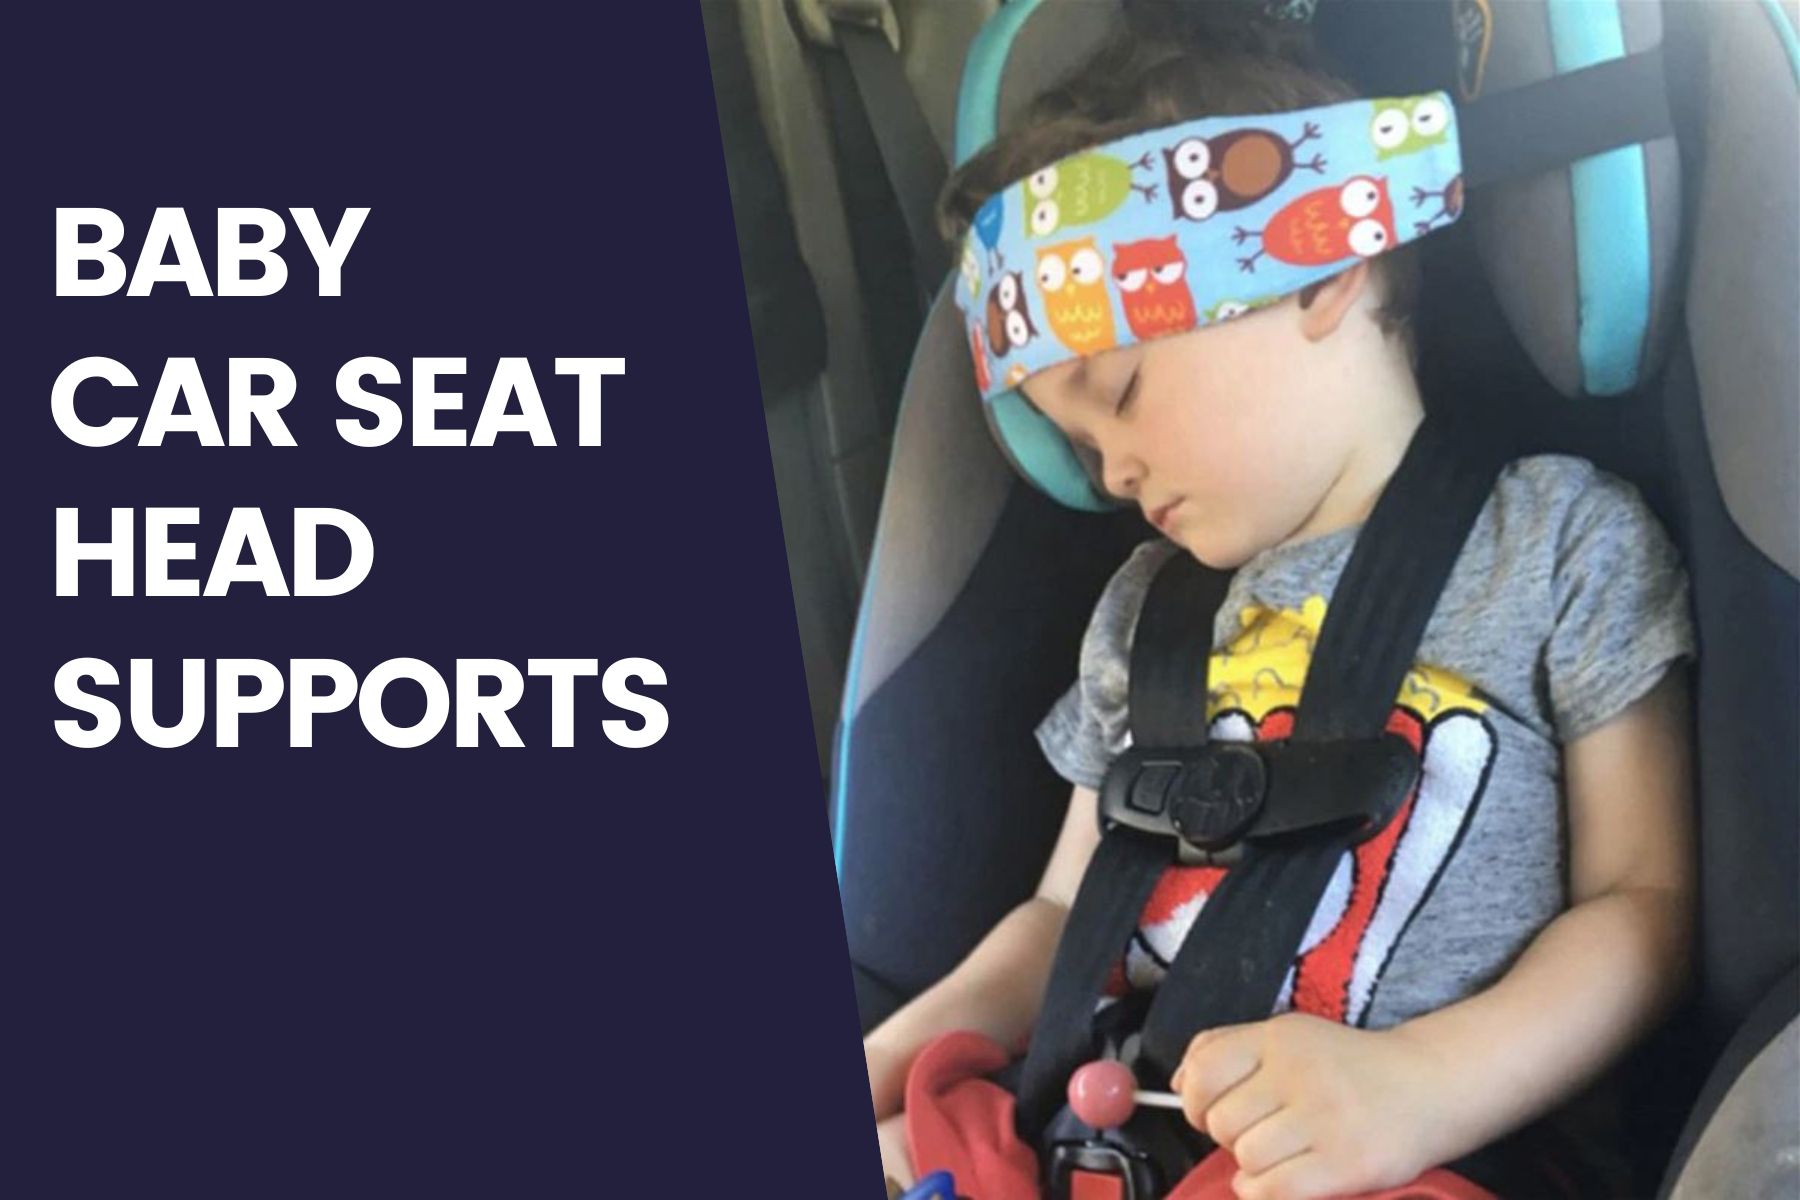 National Retail Association calls for a ban on car seat head straps -  National Retail Association